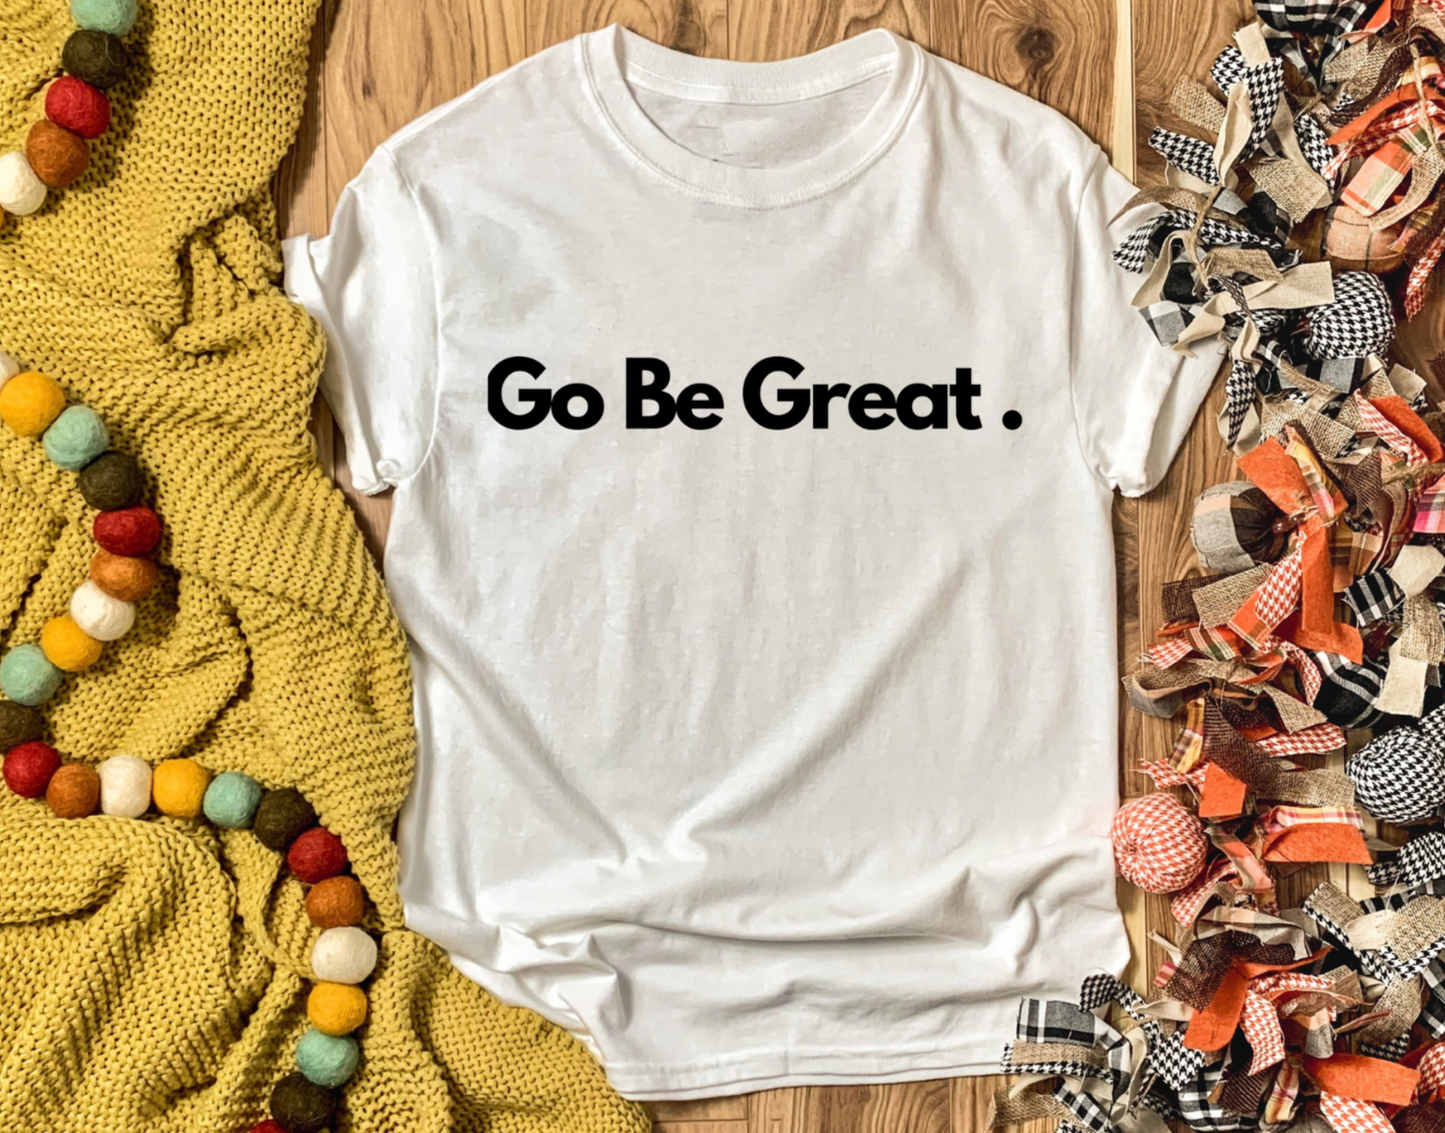 "Go Be Great" tee